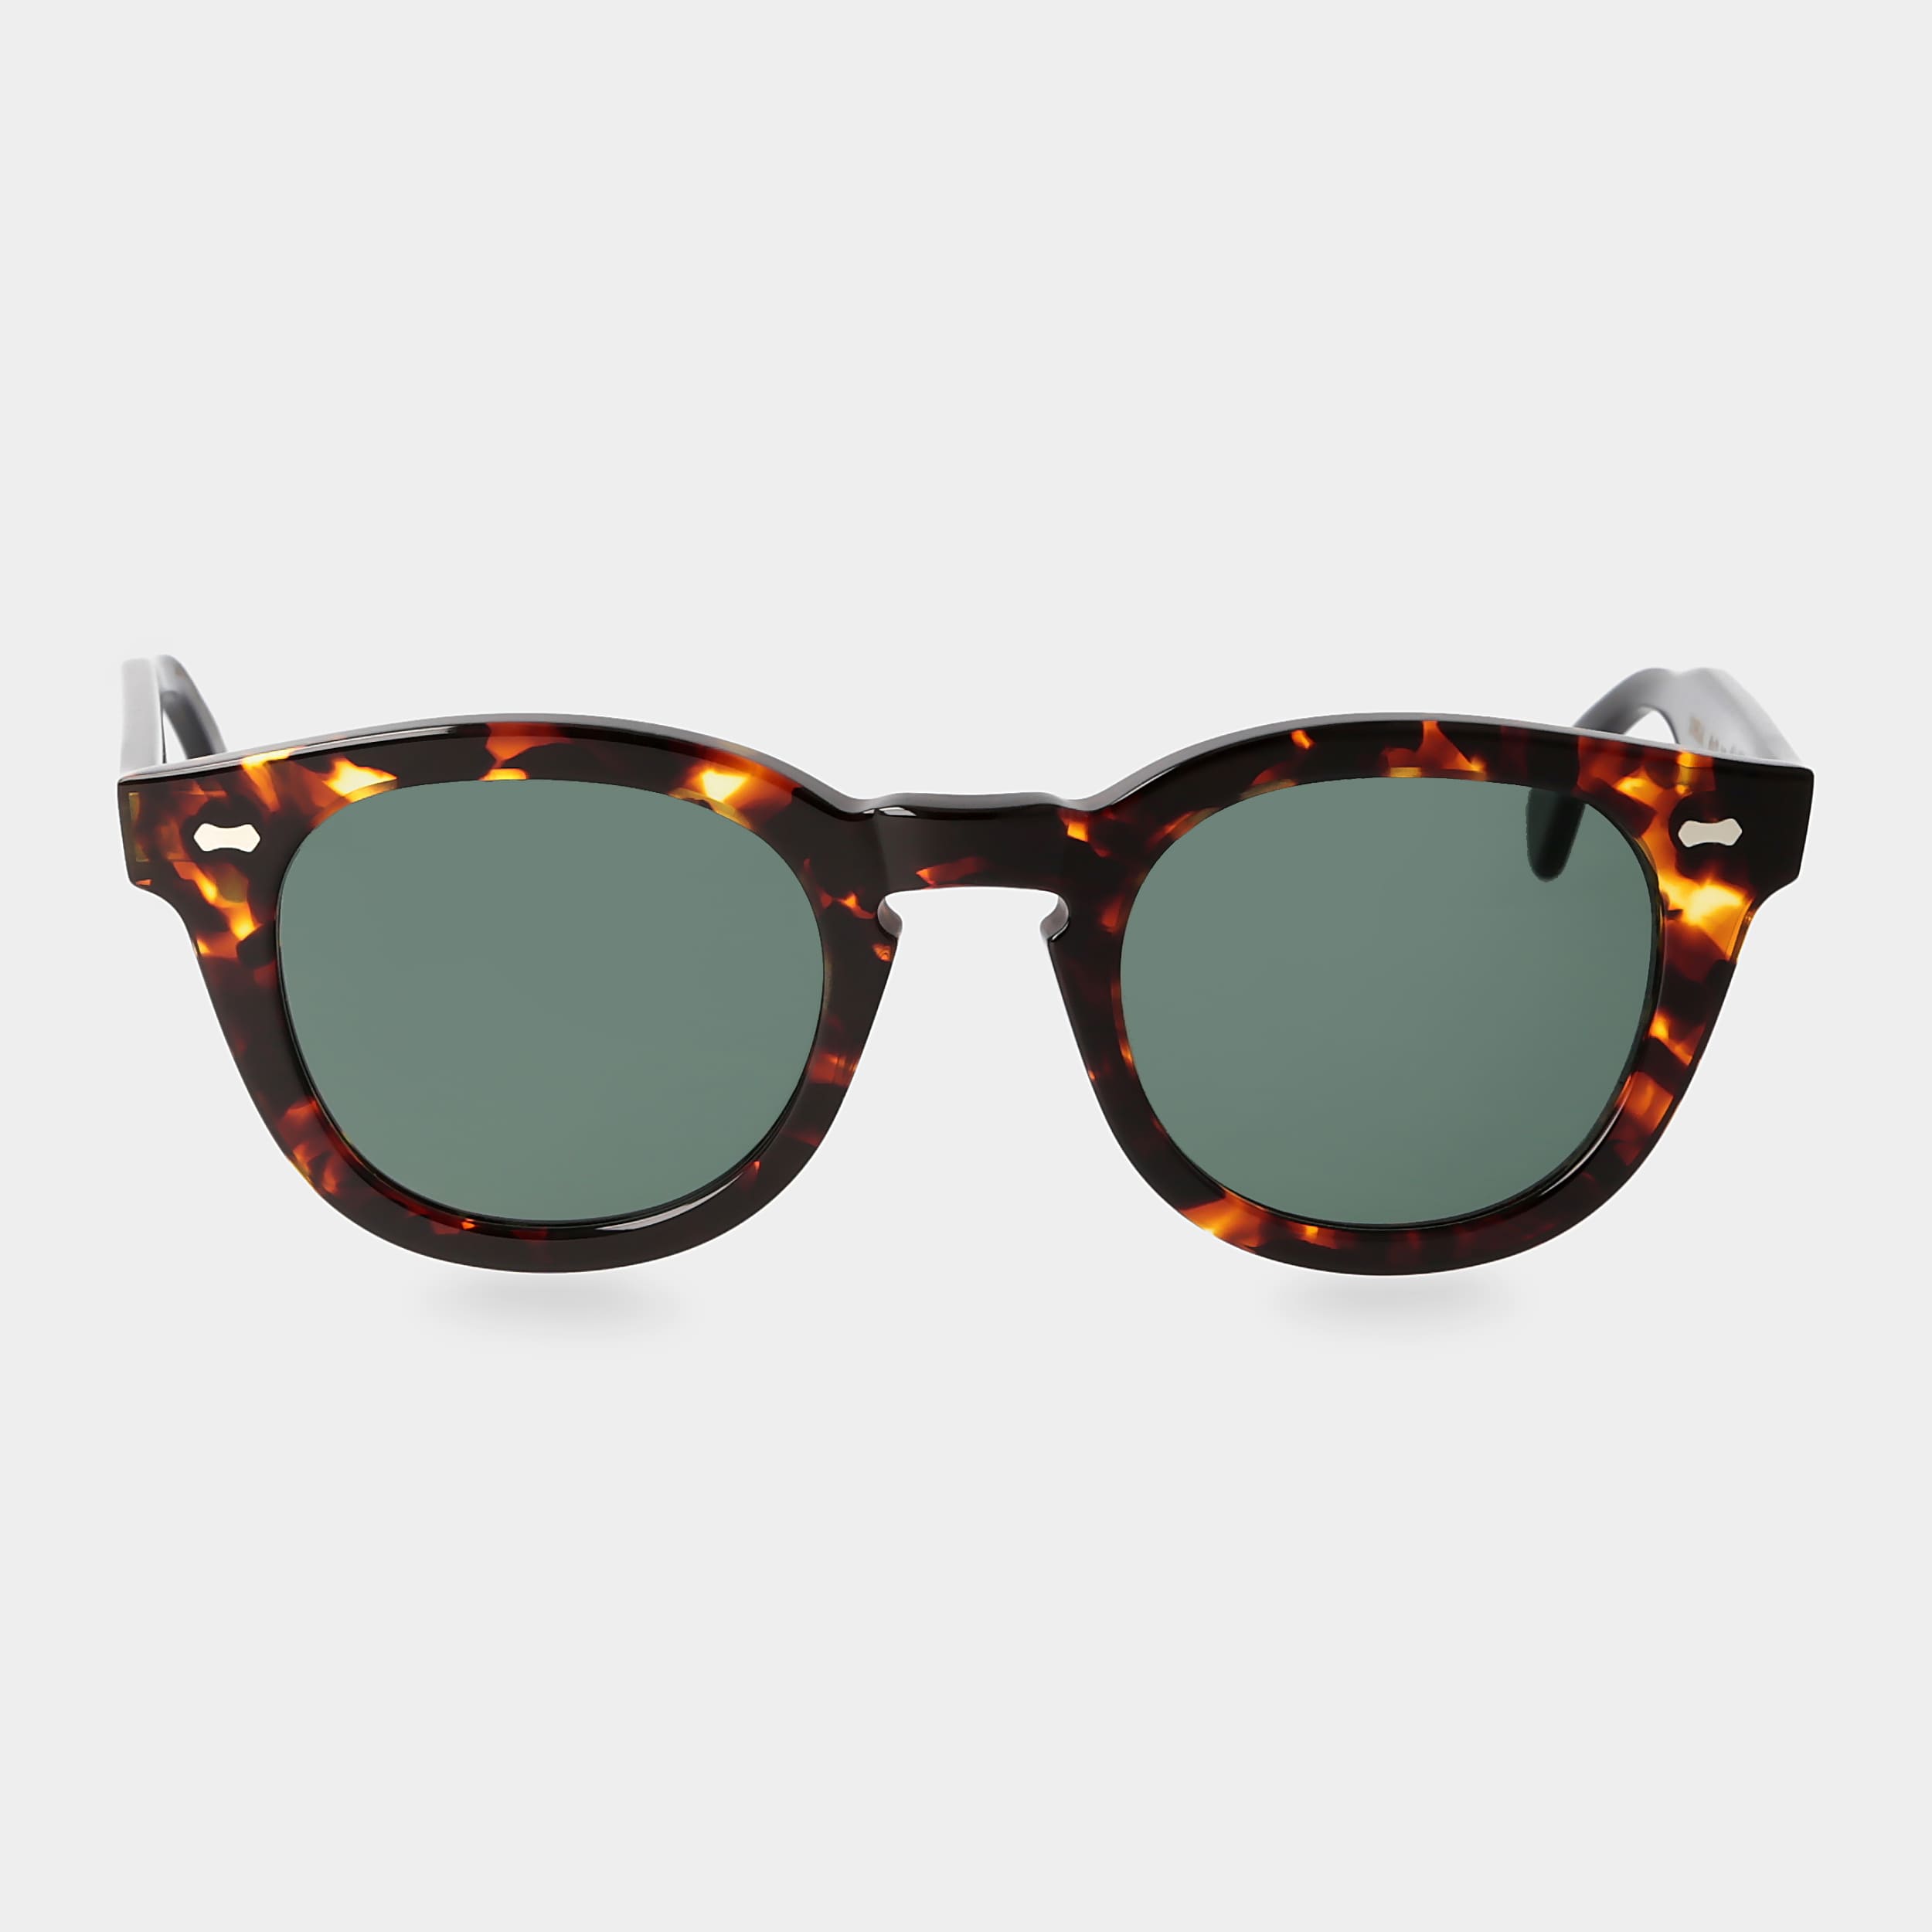 sunglasses-donegal-eco-bicolor-bottle-green-sustainable-tbd-eyewear-front